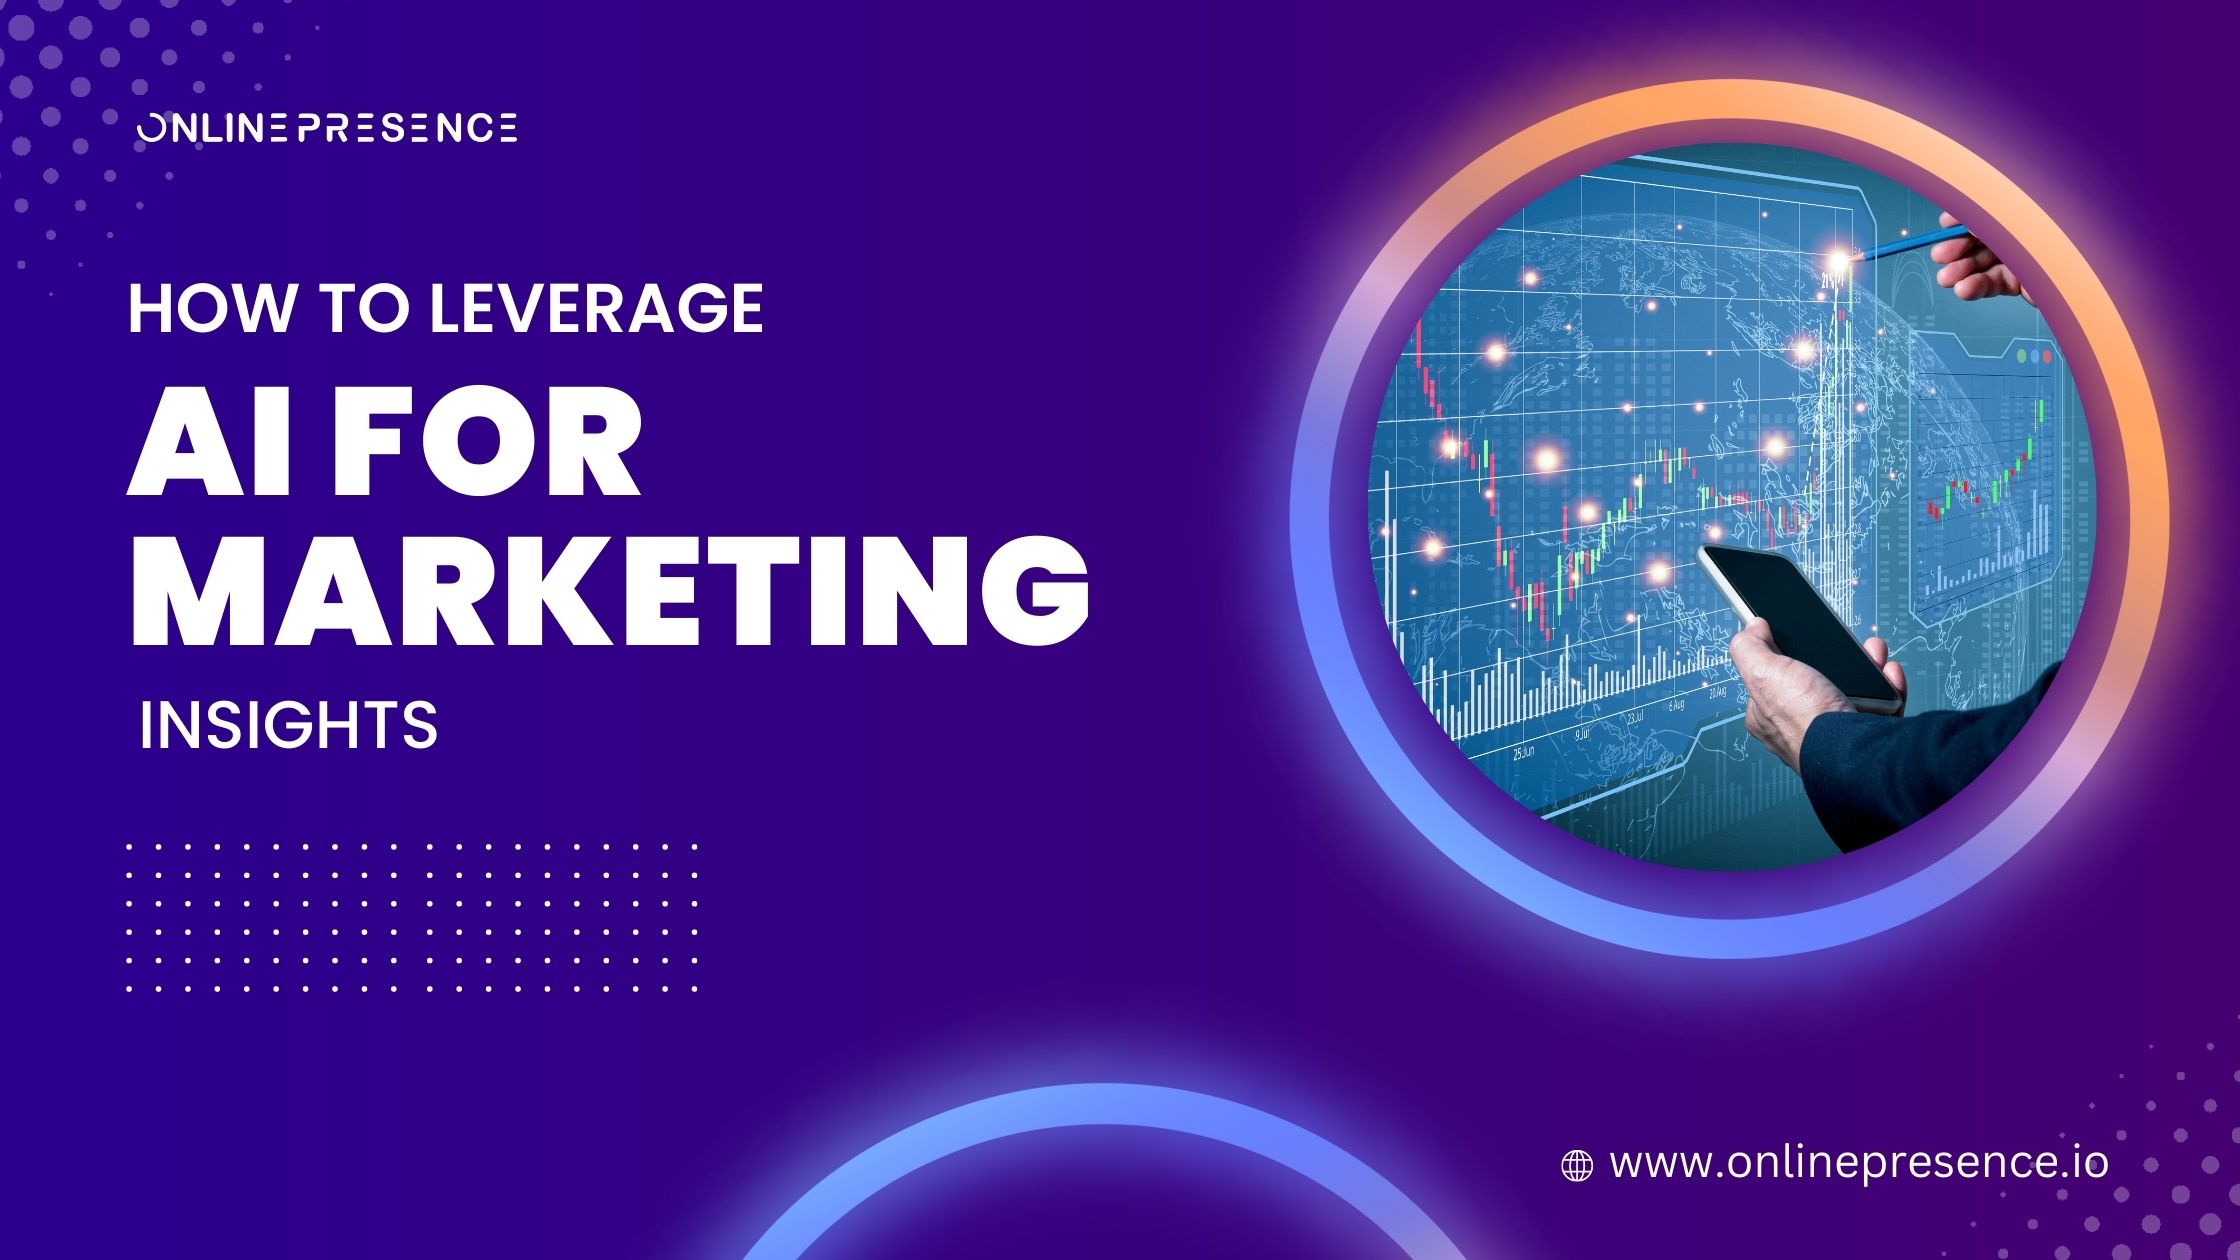 How to Leverage AI for Marketing Insights